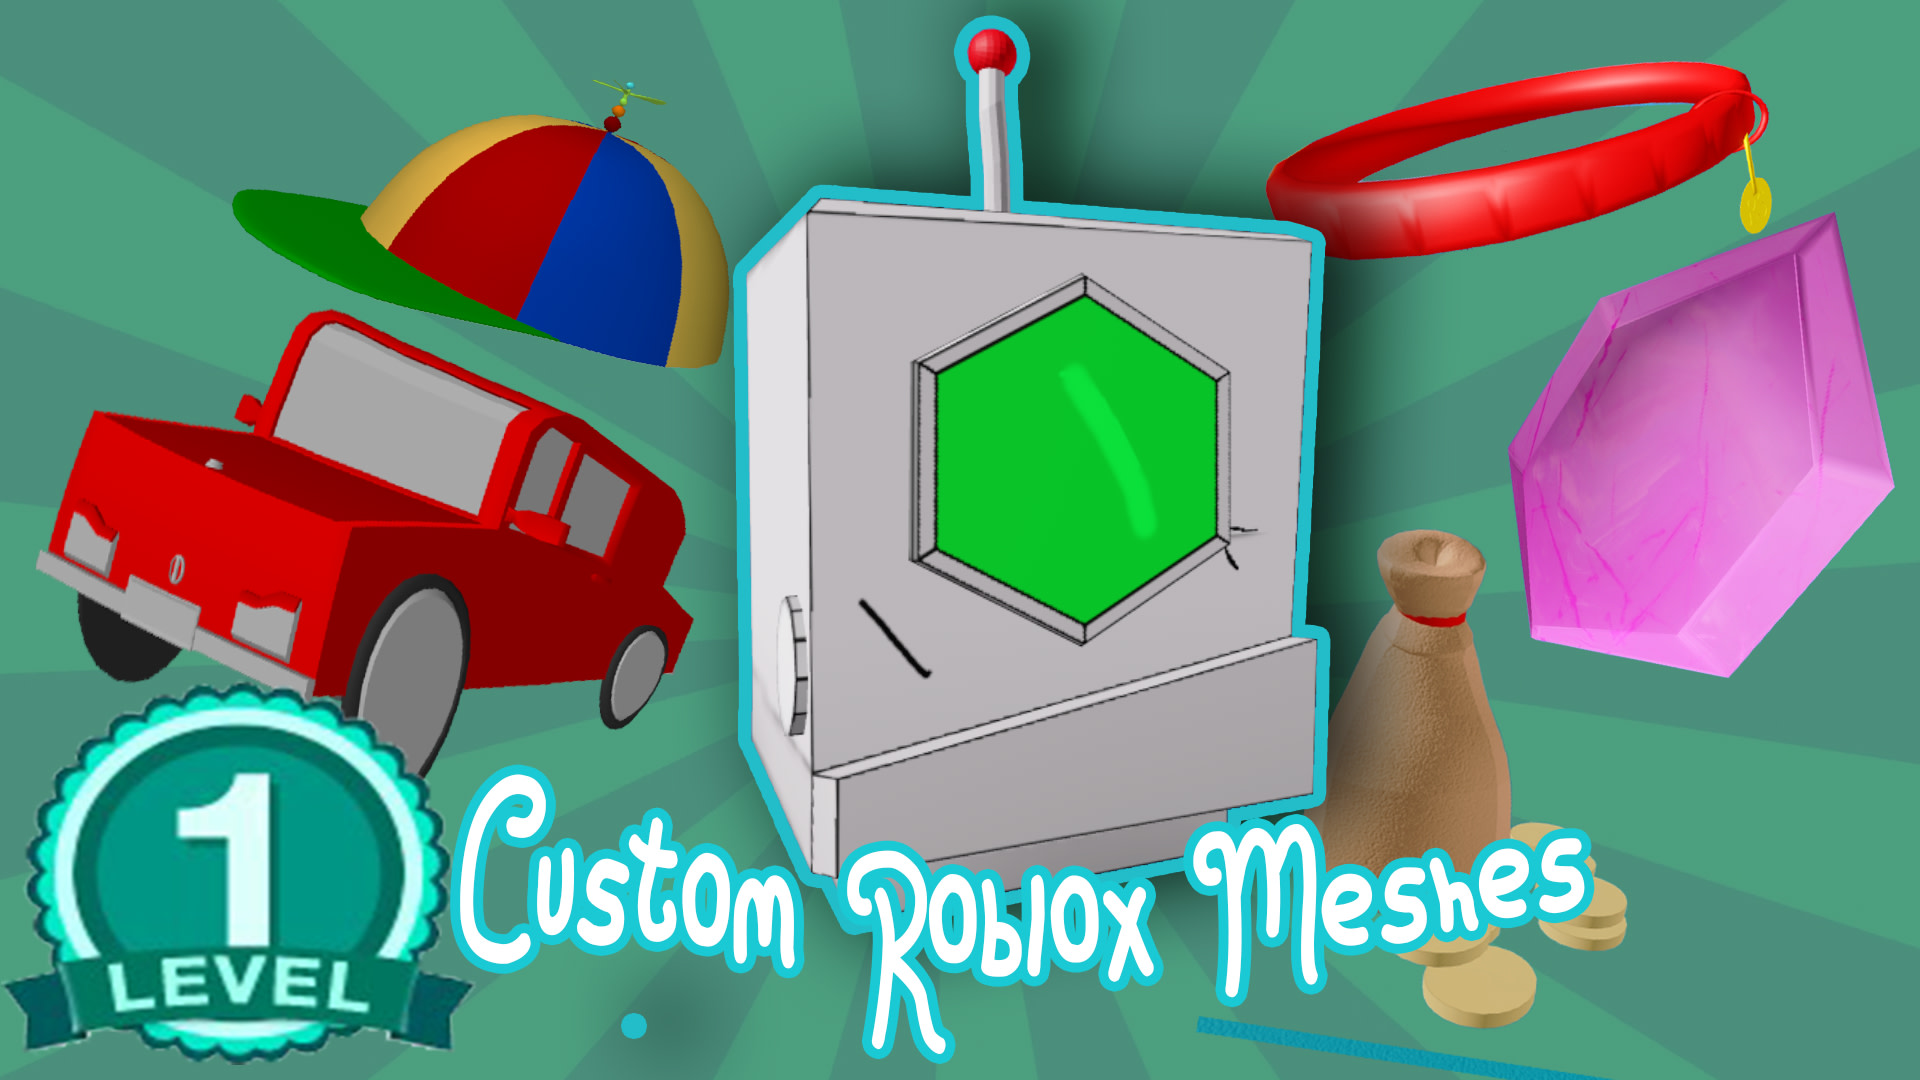 Make Meshes For Your Roblox Game By Storkclips Fiverr - mesh maker roblox